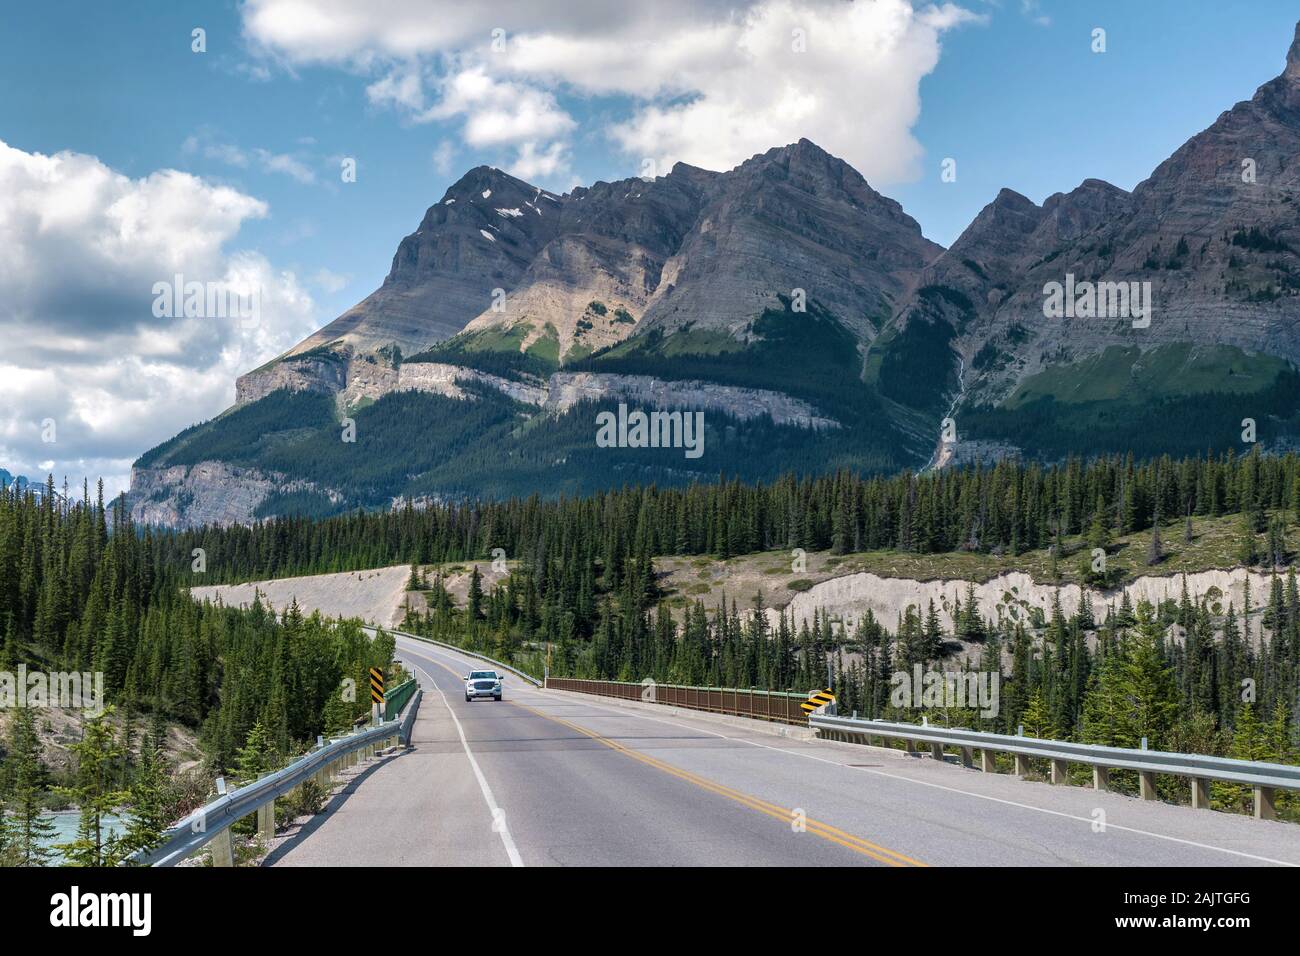 Vehicle driving on the famous Icefields Parkway route between Jasper and Banff National Parks in Alberta, Canada. Stock Photo